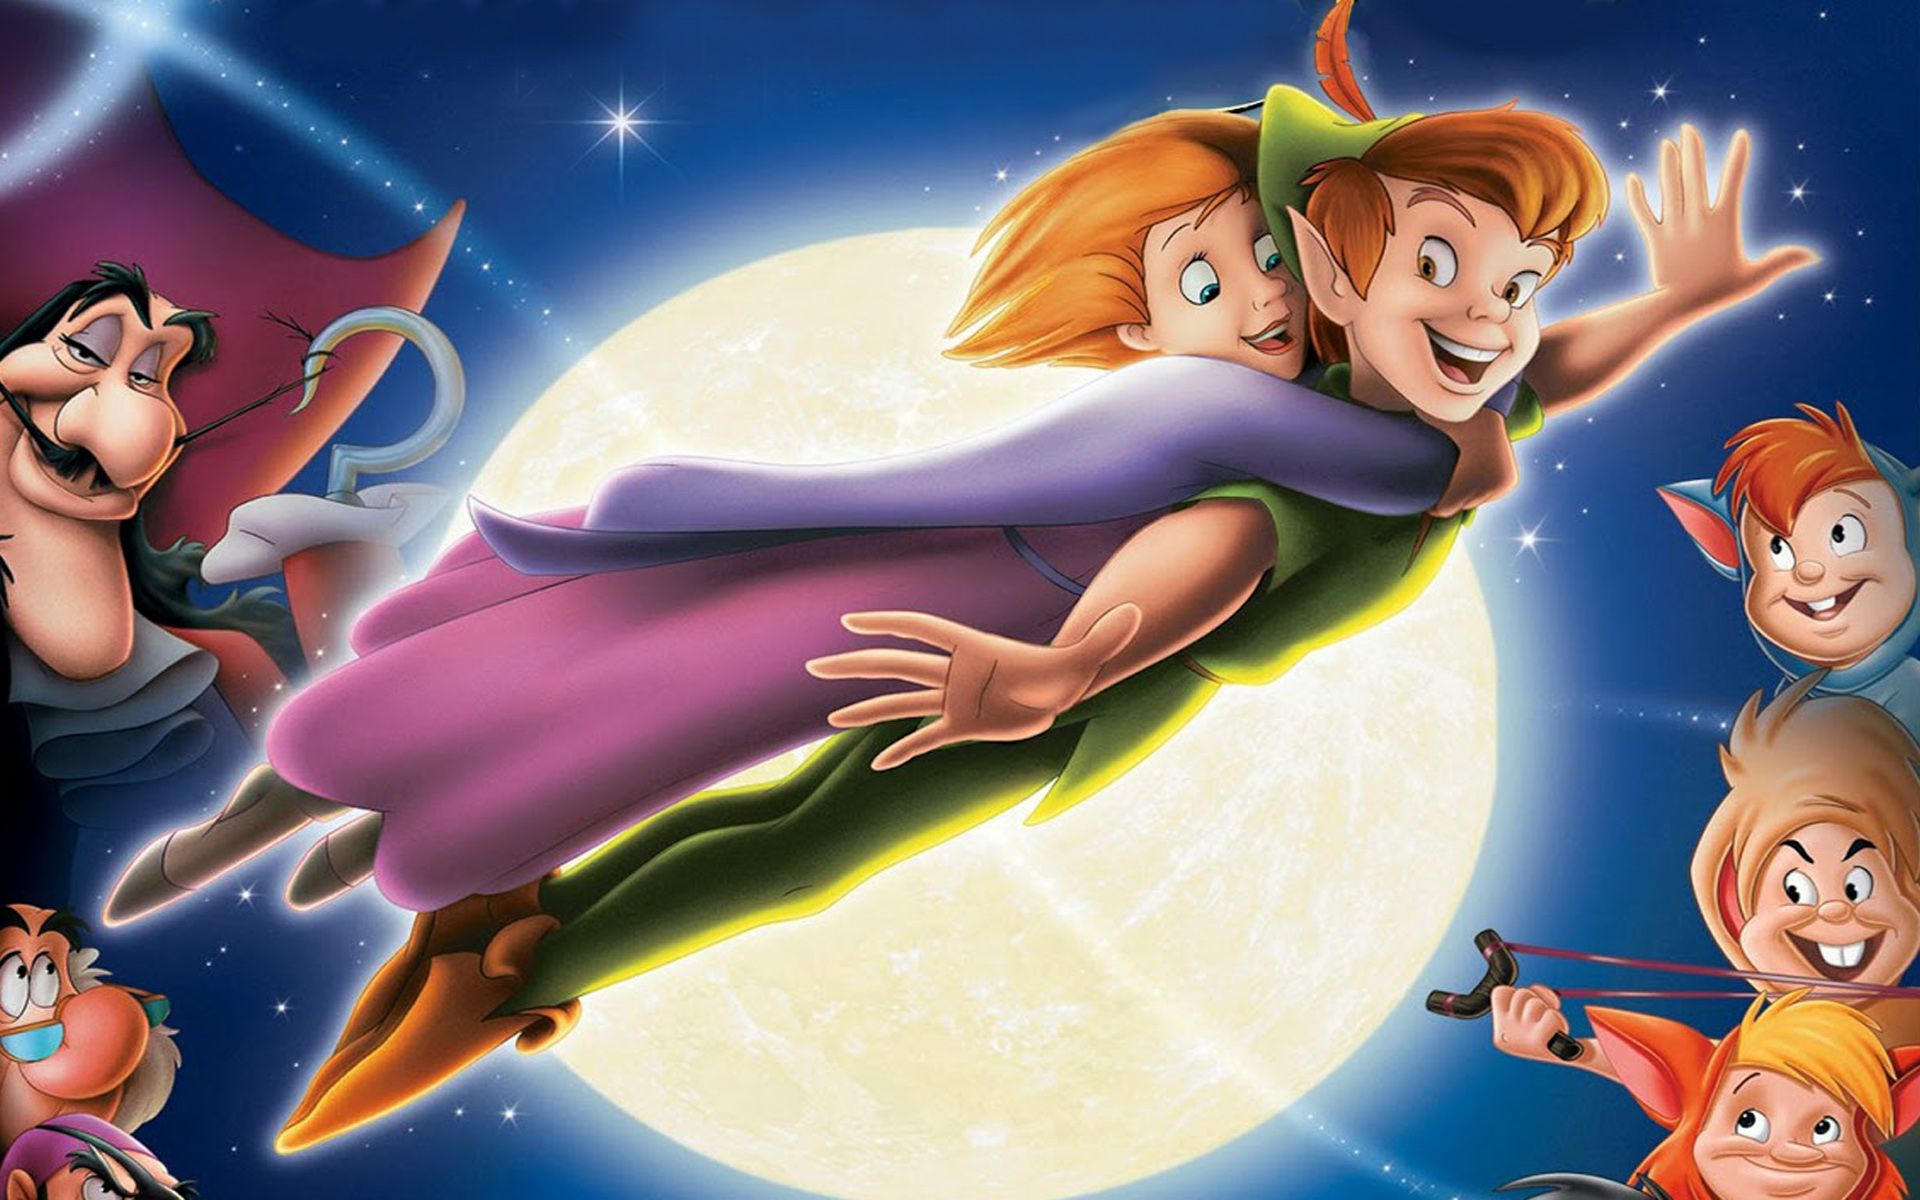 Return To Never Land Disney's Cartoon Peter Pan And Jane Can Fly Desktop Wallpaper HD For Your Computer 1920x1200, Wallpaper13.com